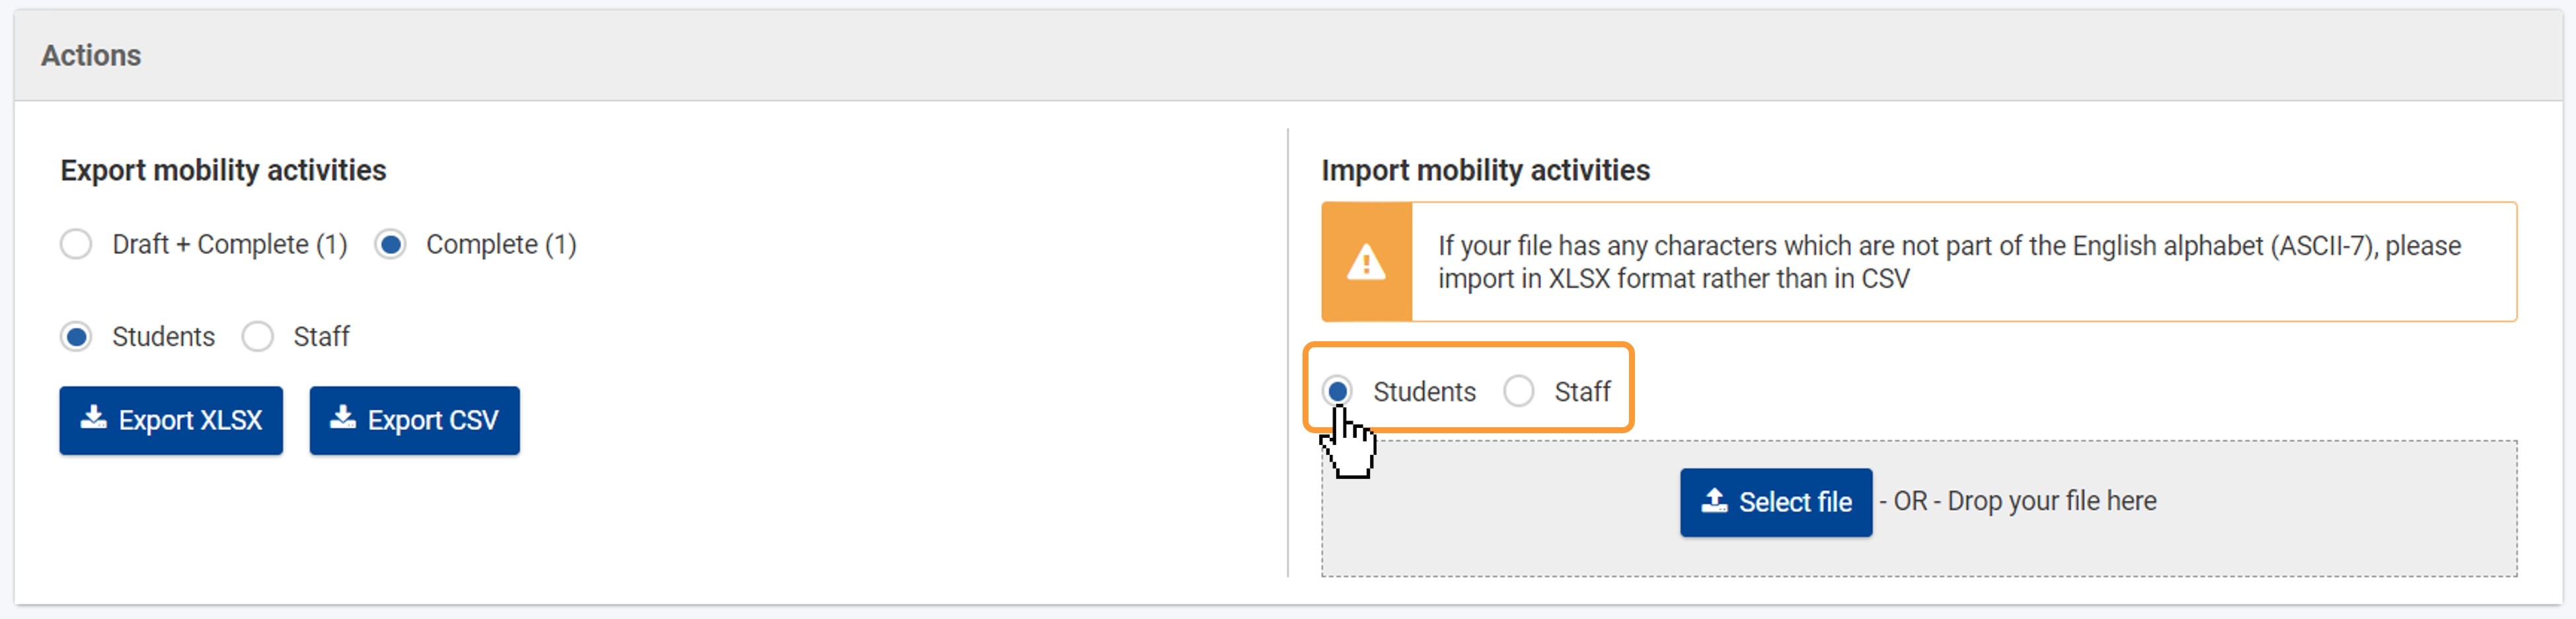 Select the type of mobility activities to import